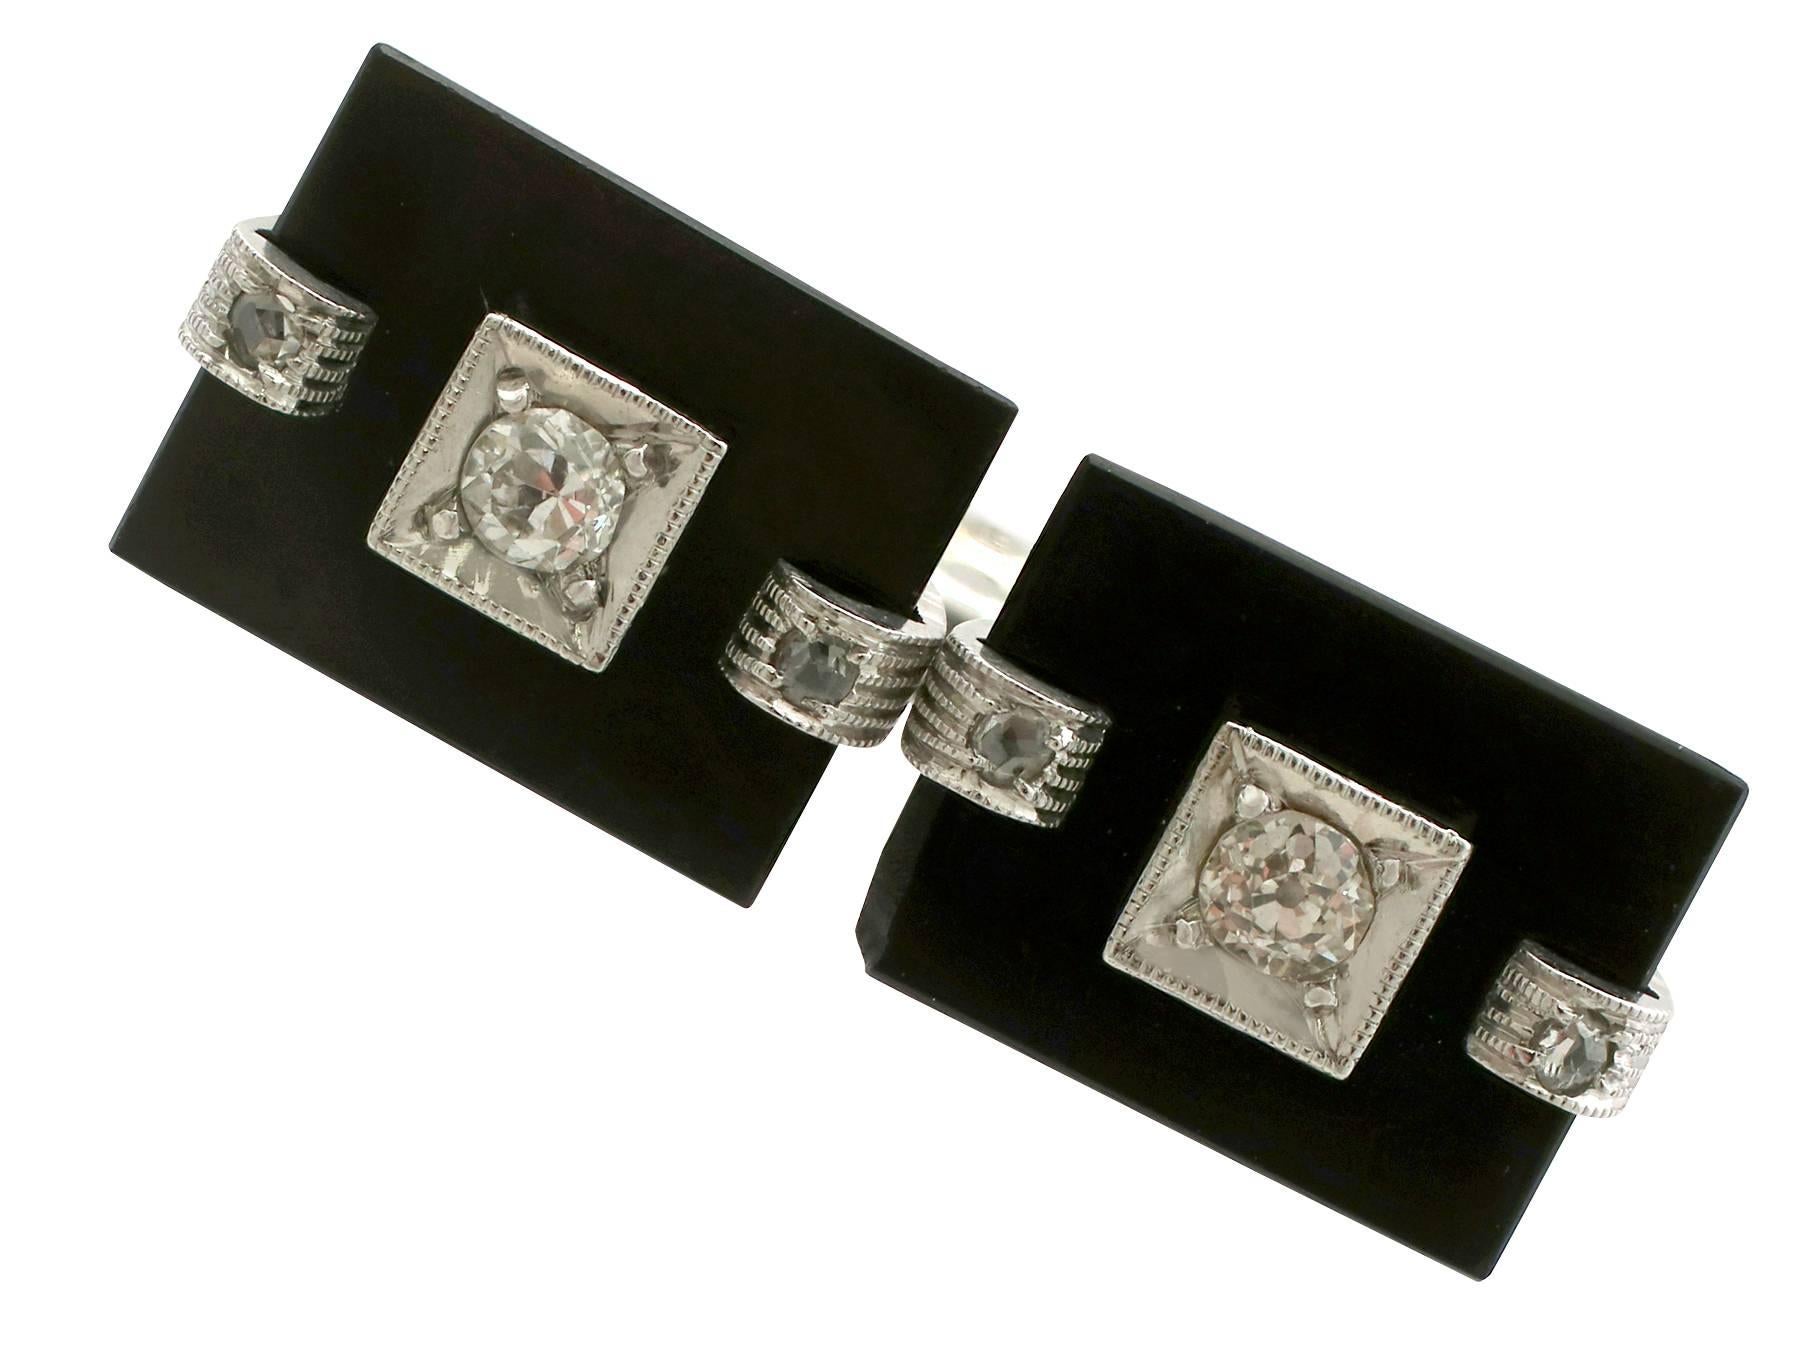 An exceptional pair of 0.32 carat diamond and black onyx, 18 karat white gold cufflinks by Brevet; part of our diverse antique jewelry and estate jewelry collections

These exceptional antique onyx and diamond cufflinks have been crafted in 18k